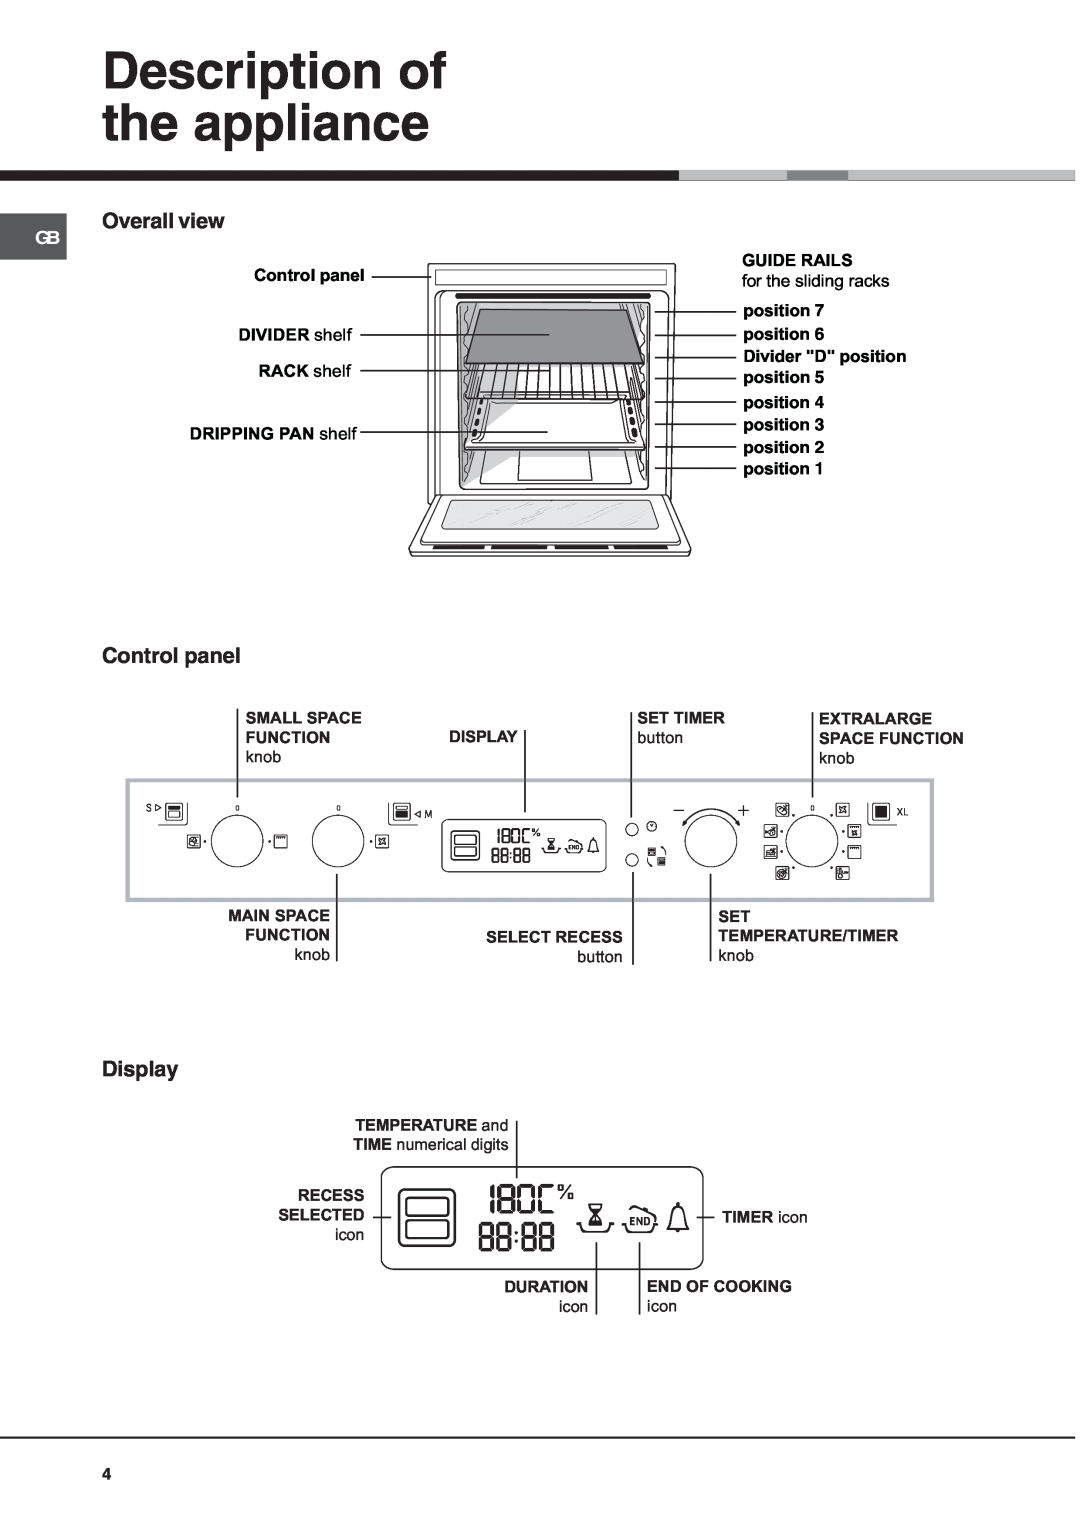 Hotpoint OS 897D C IX/HP manual Description of the appliance, Overall view, Control panel, Display, Guide Rails, position 